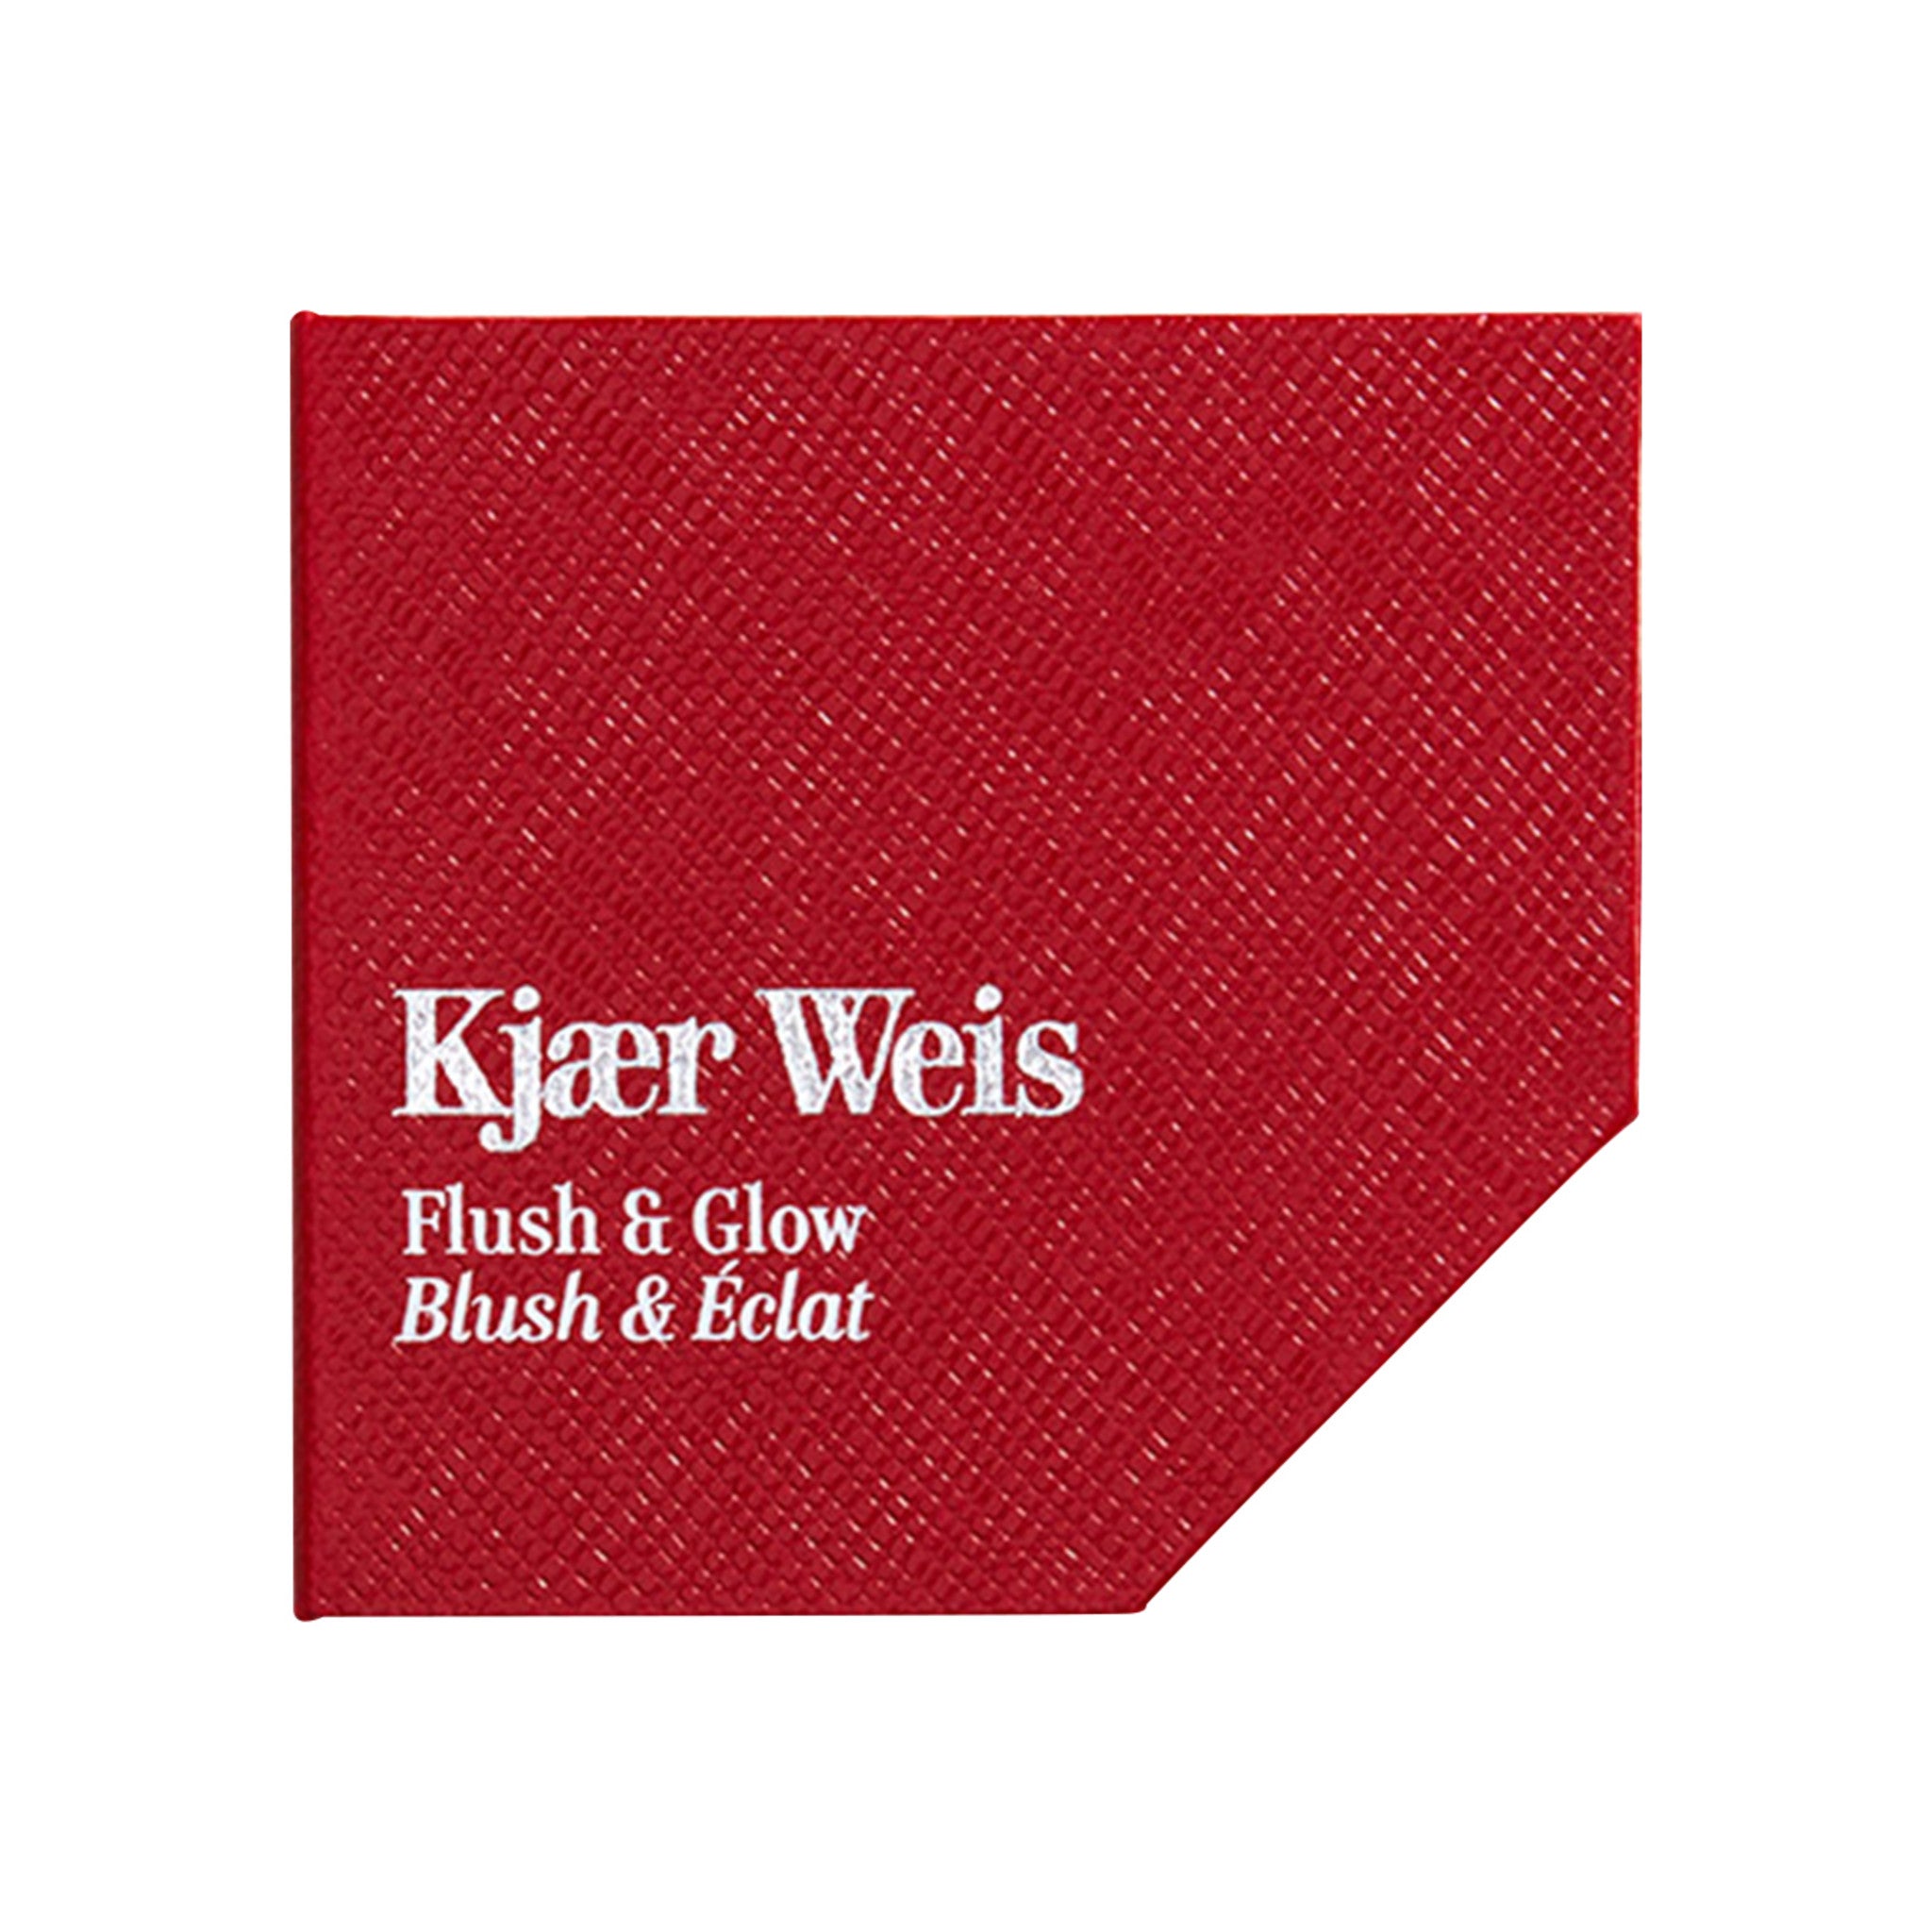 Kjaer Weis Red Edition Flush and Glow Case main image.